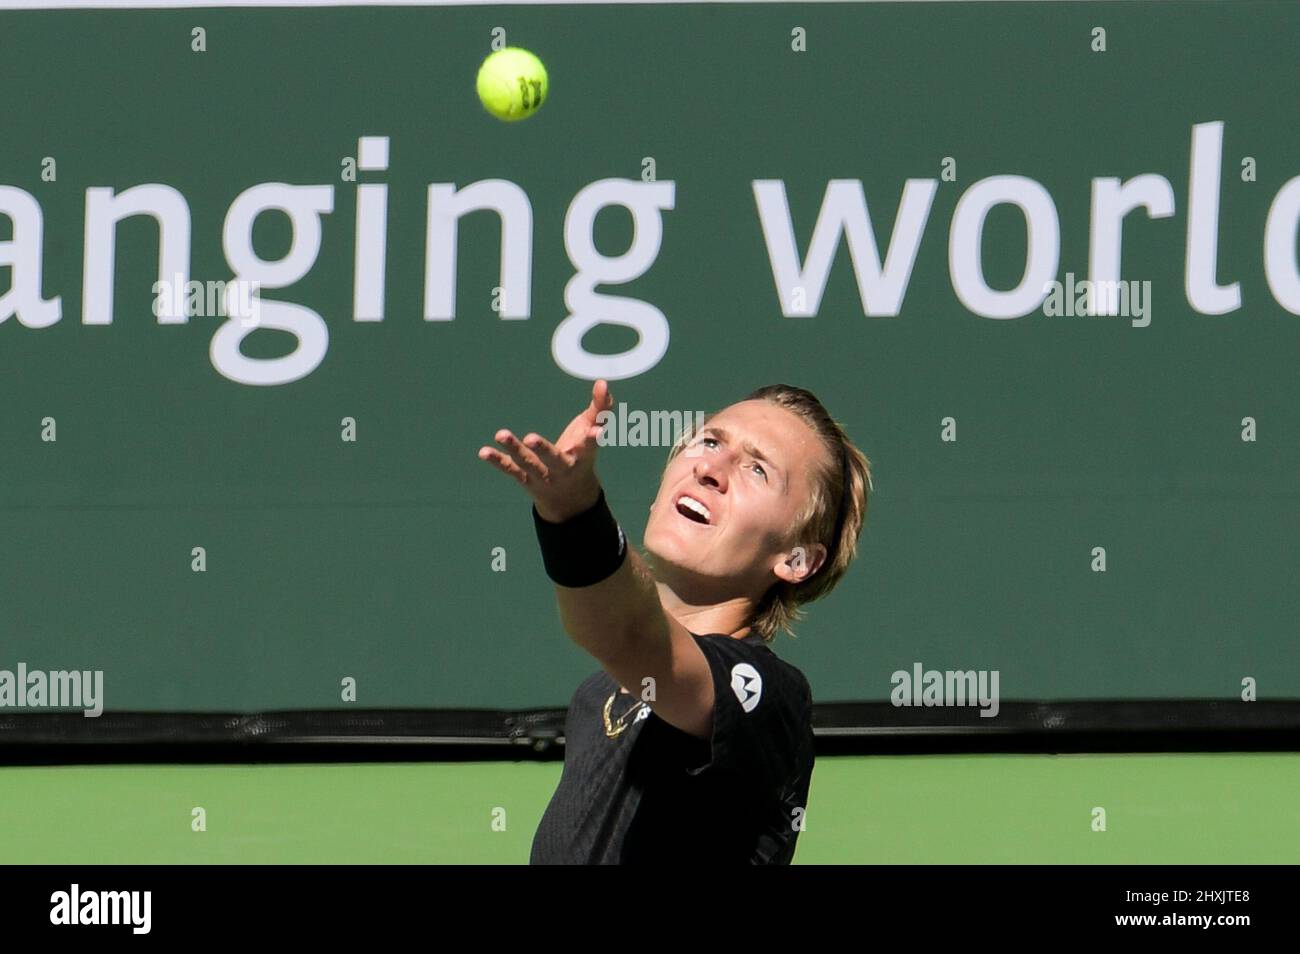 Sebastian Korda (USA) is defeated by Rafael Nadal (ESP) 2-6, 6-1, 6-7 (3-7), at the BNP Paribas Open being played at Indian Wells Tennis Garden in Indian Wells, California on March 12, 2022: © Karla Kinne/Tennisclix/CSM Stock Photo